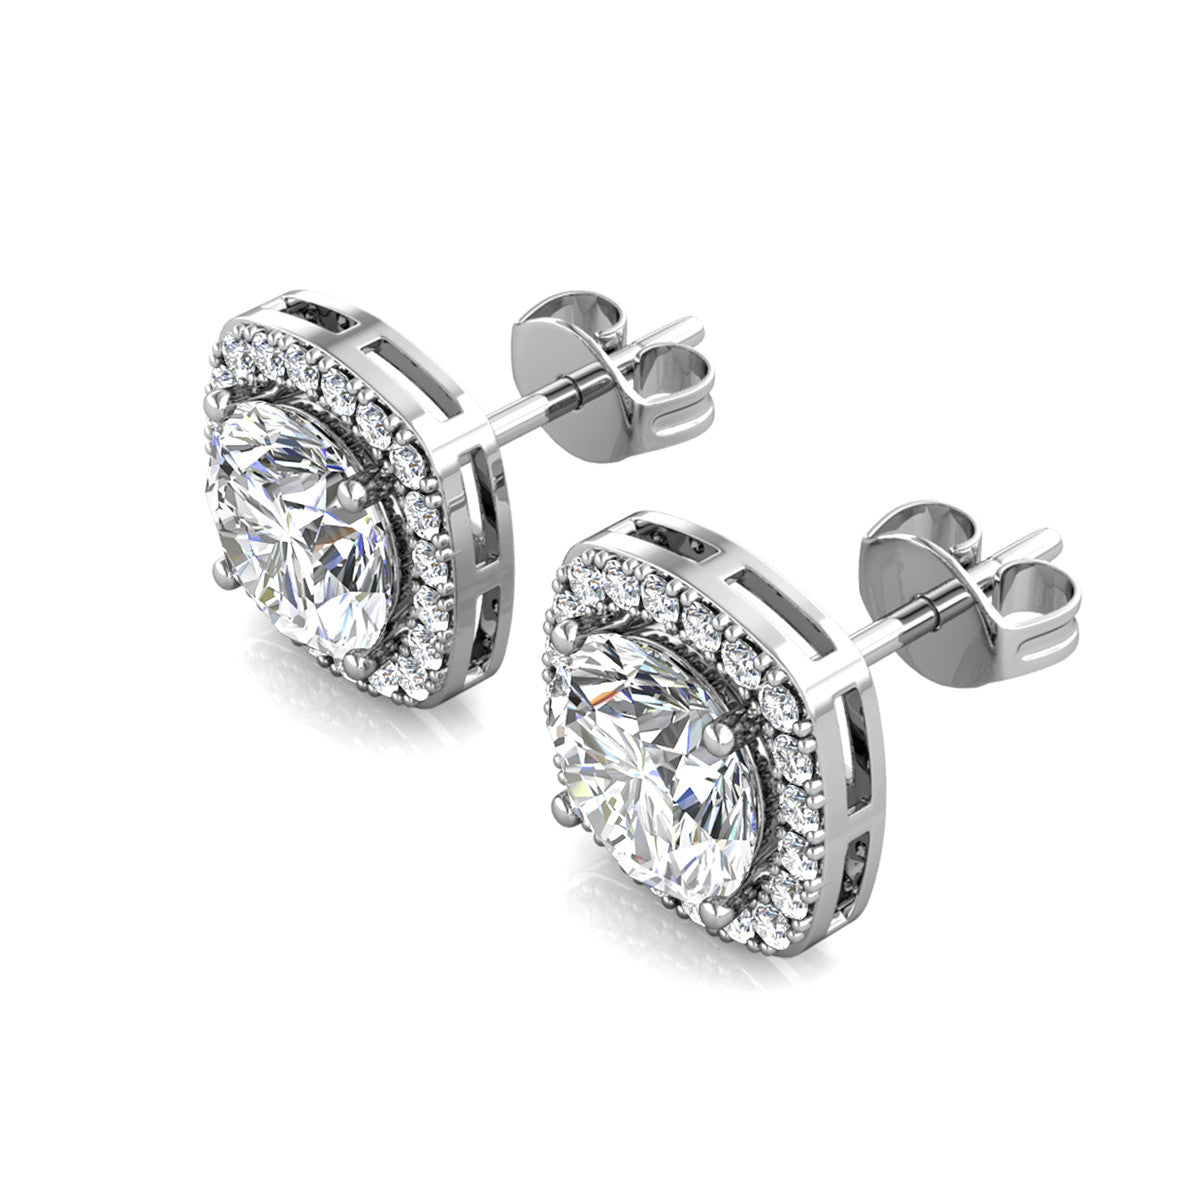 Moissanite by Cate & Chloe Hannah Sterling Silver Stud Earrings with Moissanite and 5A Cubic Zirconia Crystals